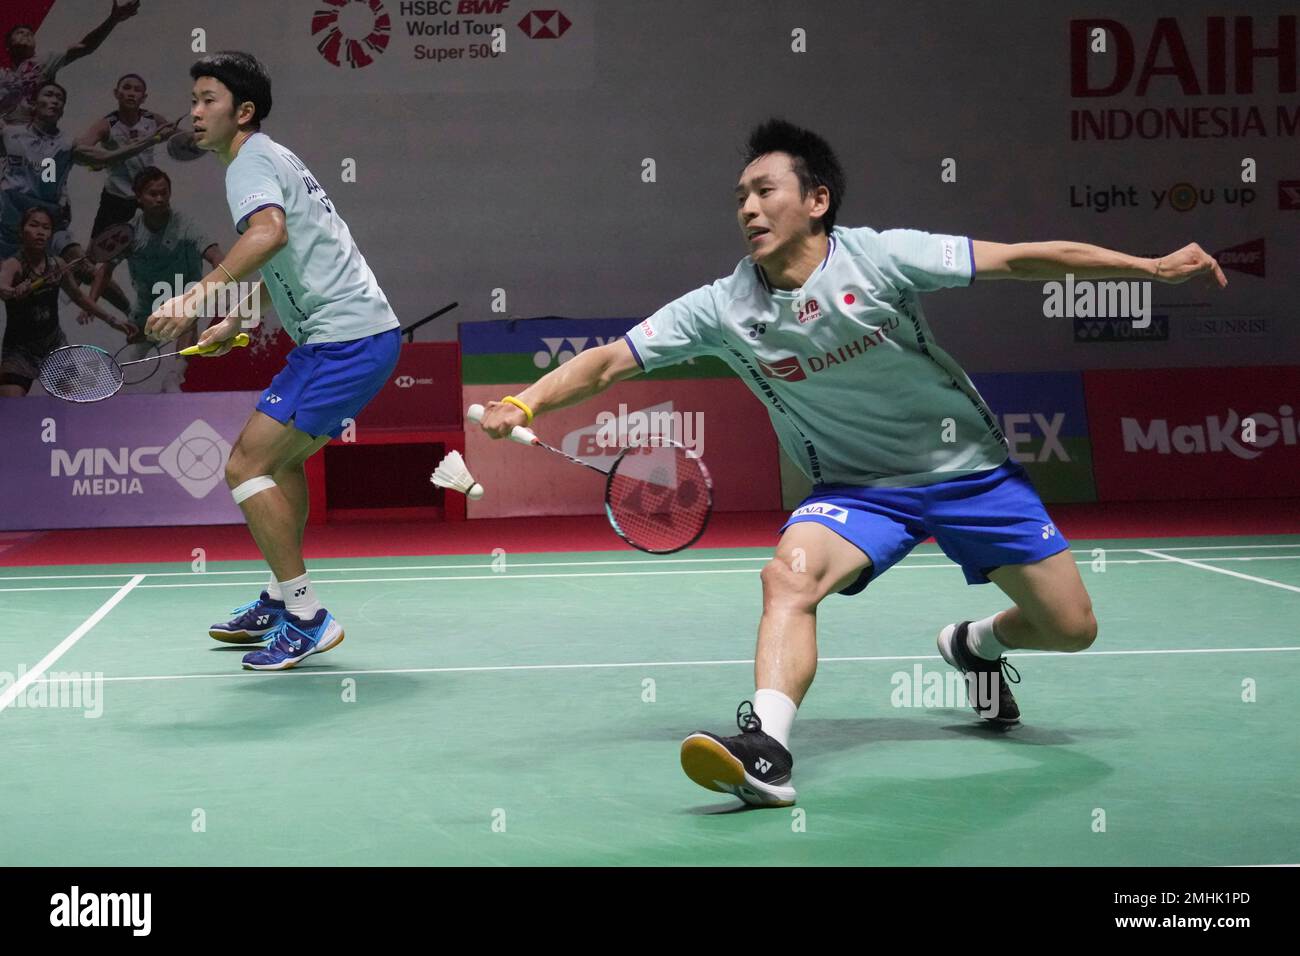 Indonesias Daniel Marthin, right, with Leo Rolly Carnando play against South Koreas Kang Min-hyuk and Seo Sung-jae during their mens doubles quarter final match at Indonesia Open badminton tournament at Istora Stadium